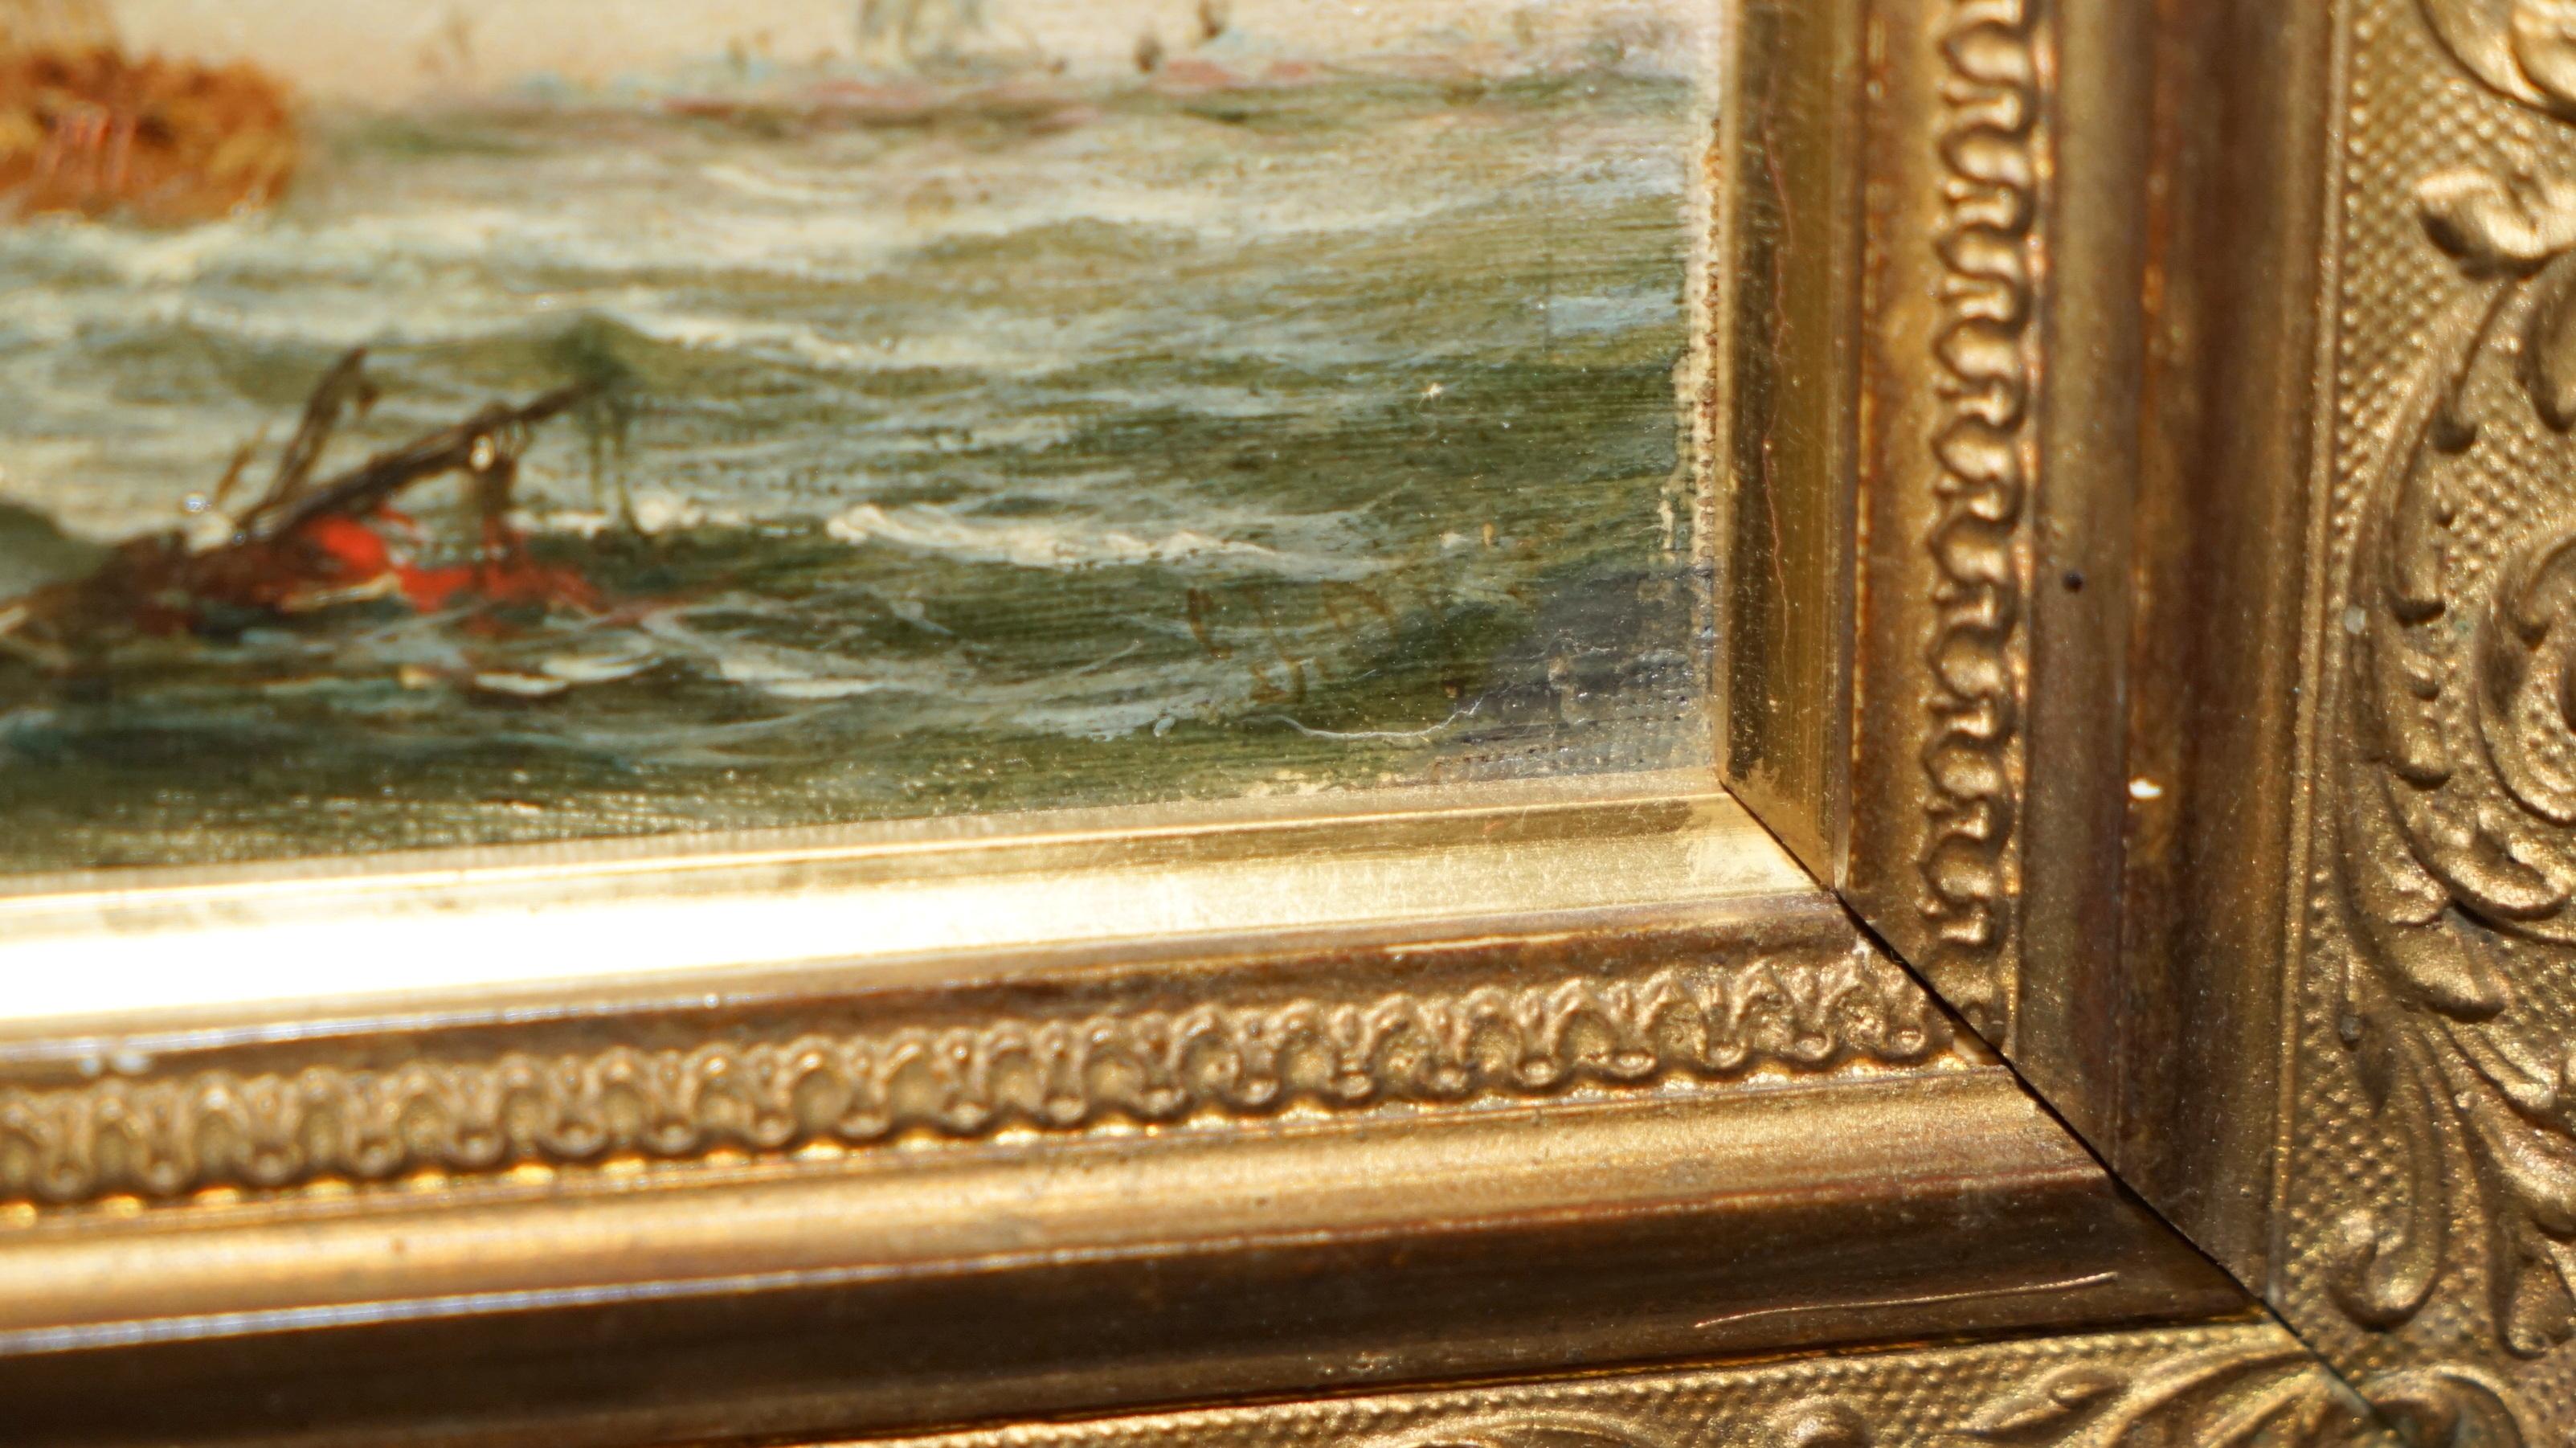 Hand-Painted SMALL ANTIQUE NAUTICAL VICTORIAN OIL PAiNTING OF A EARLY 19TH CENTURY SHIP For Sale